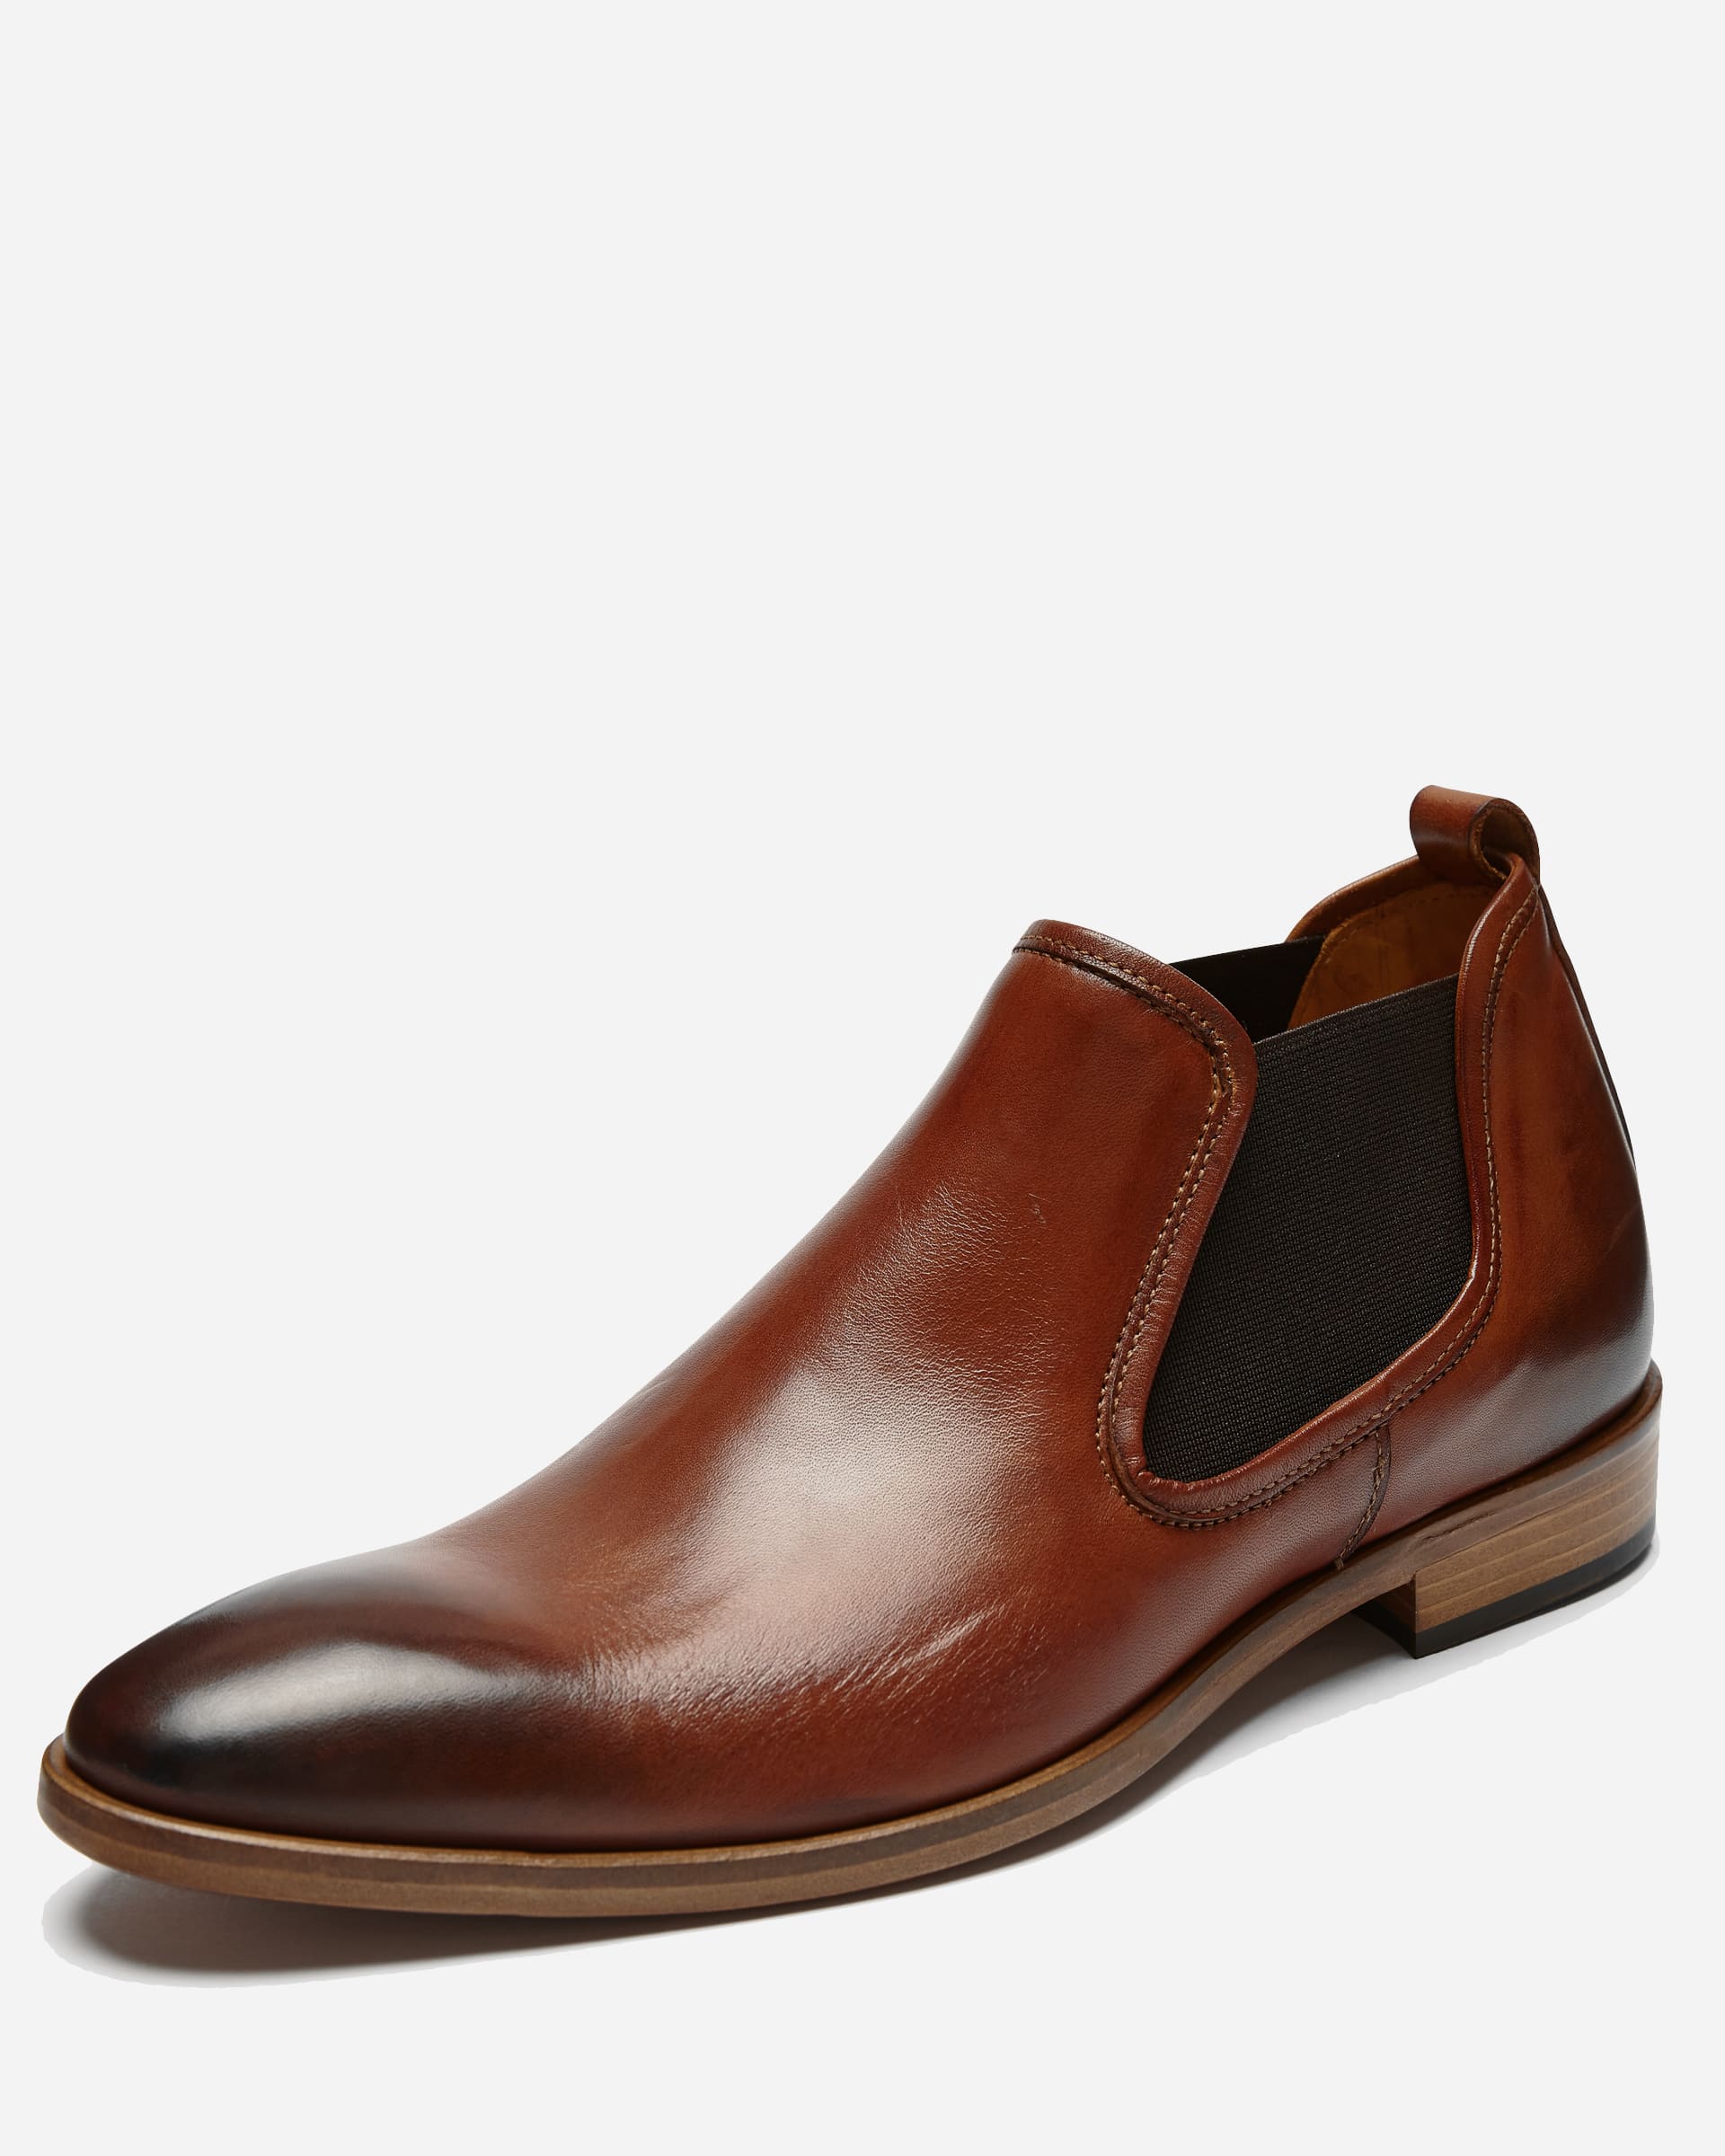 Whiskey Chelsea Boot - Men's Chelsea Boots at Menzclub